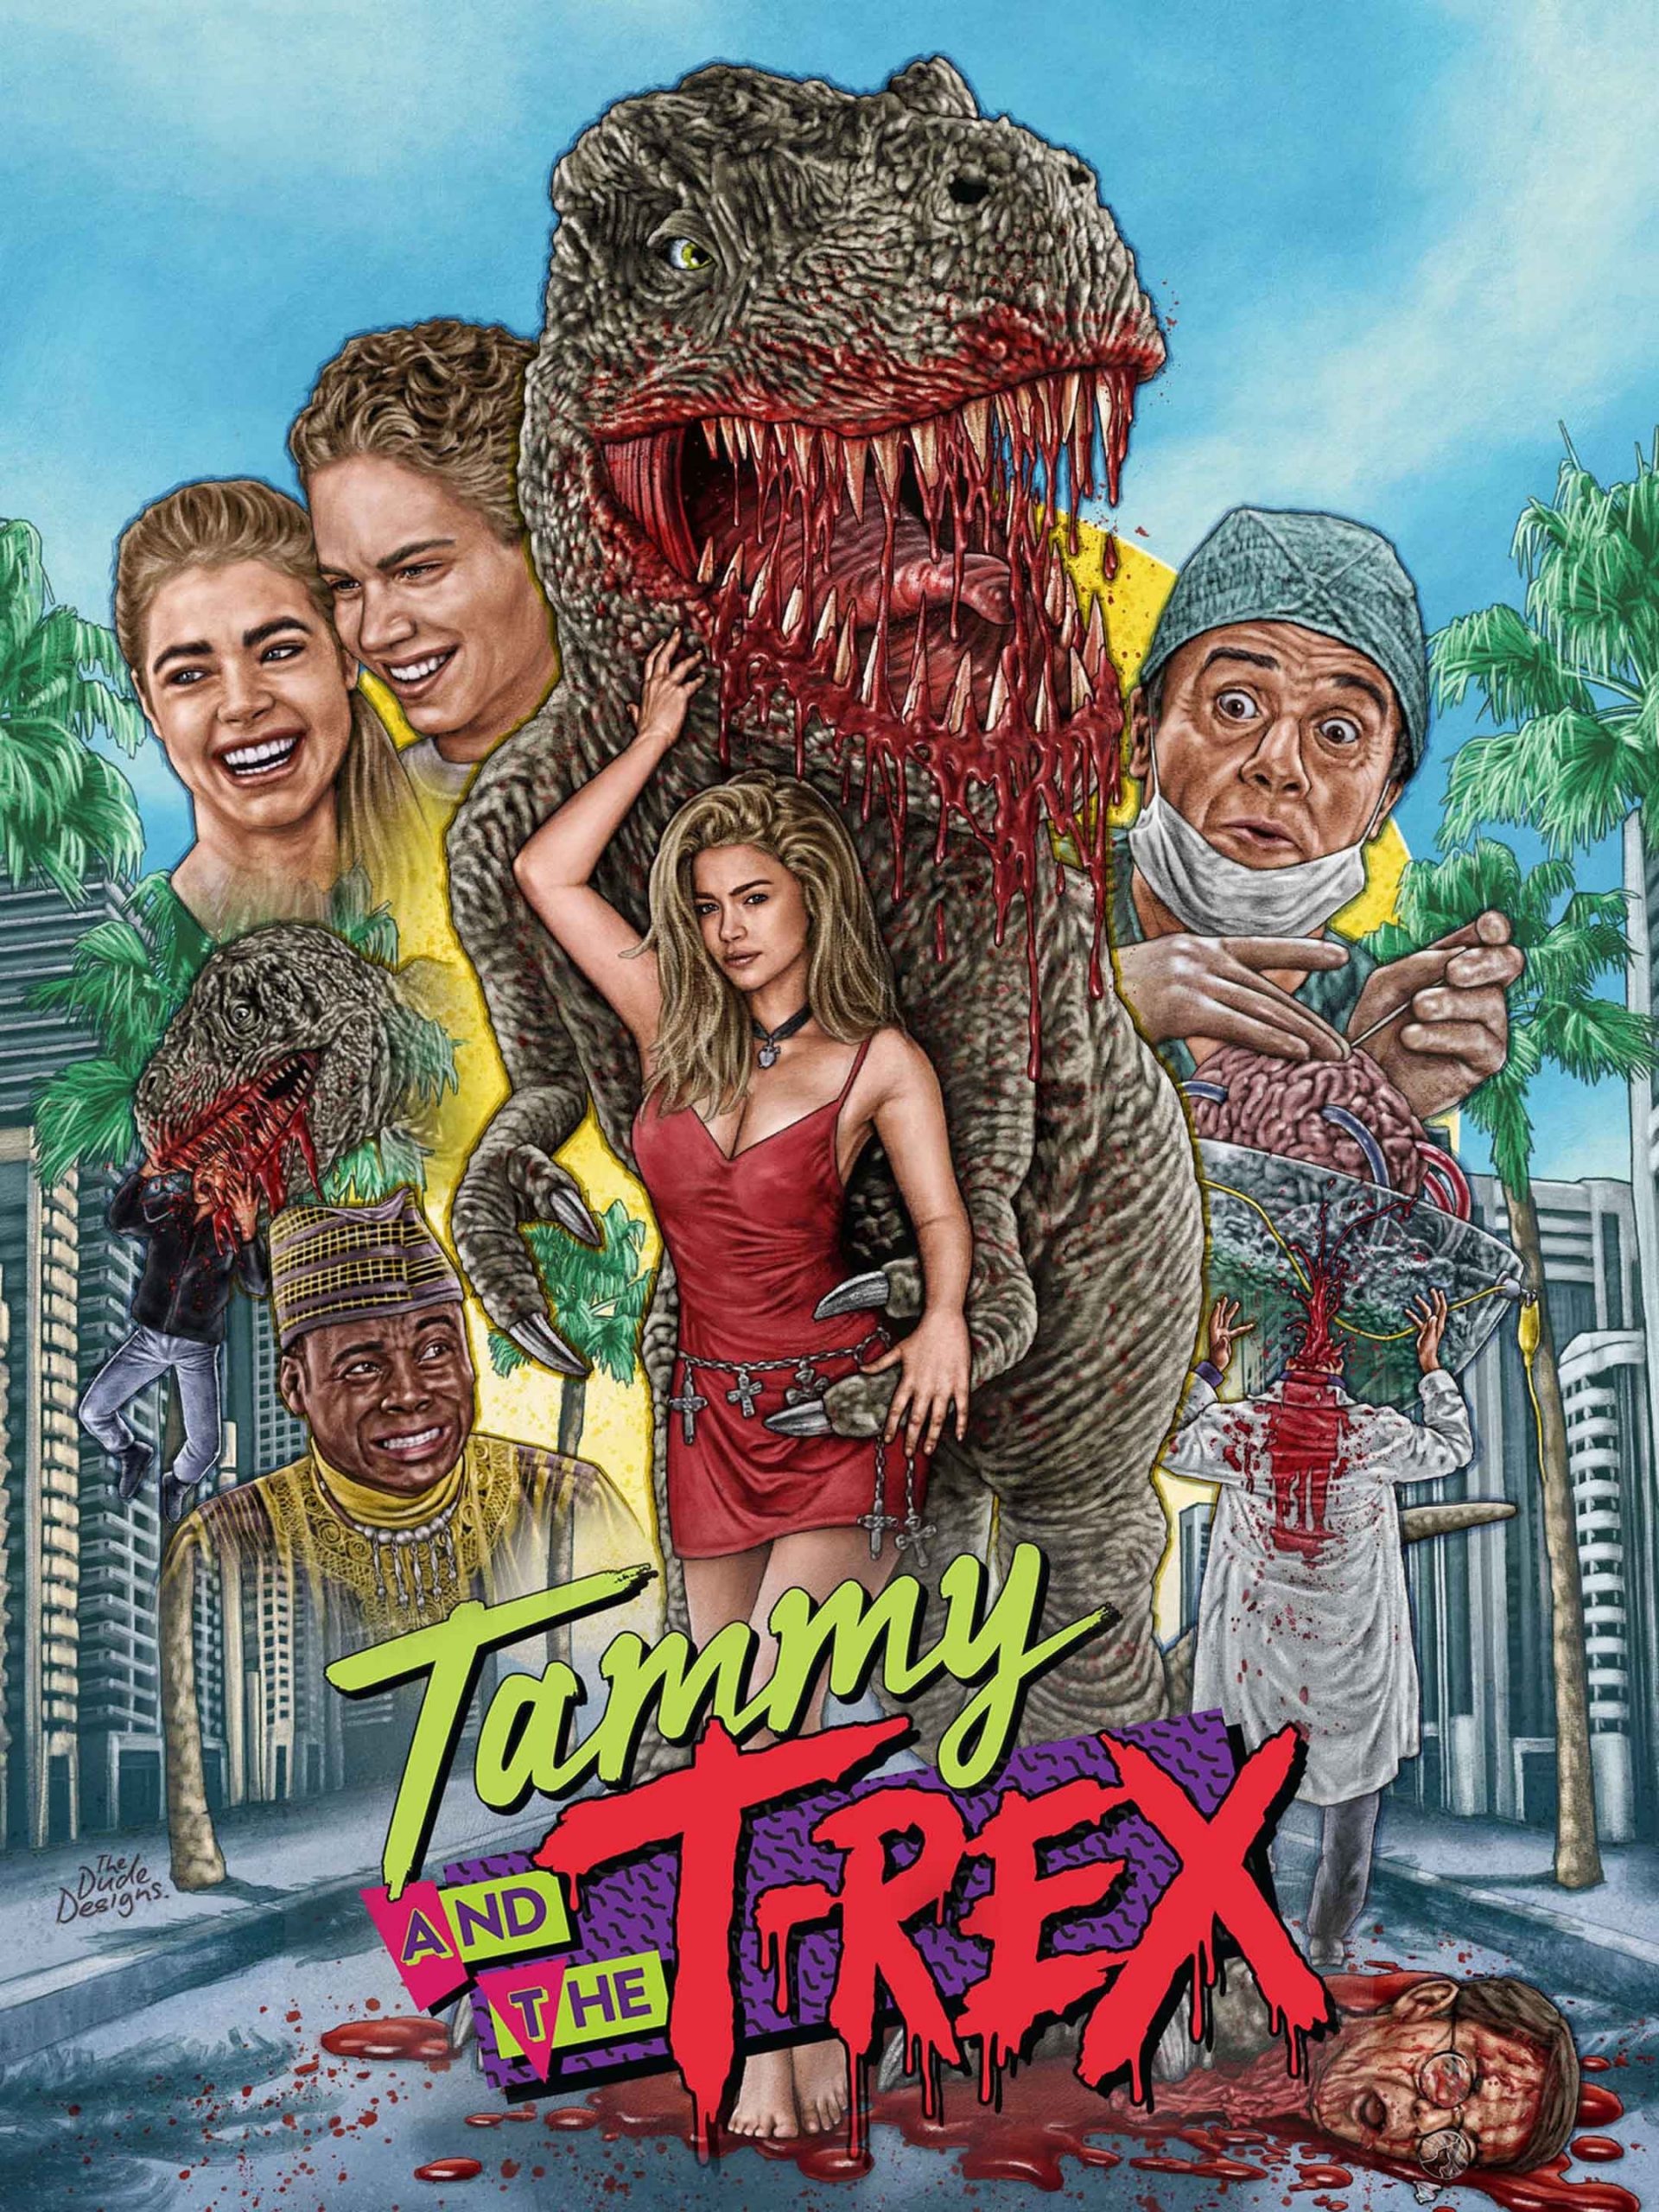 Tammy And The T-Rex (1994)